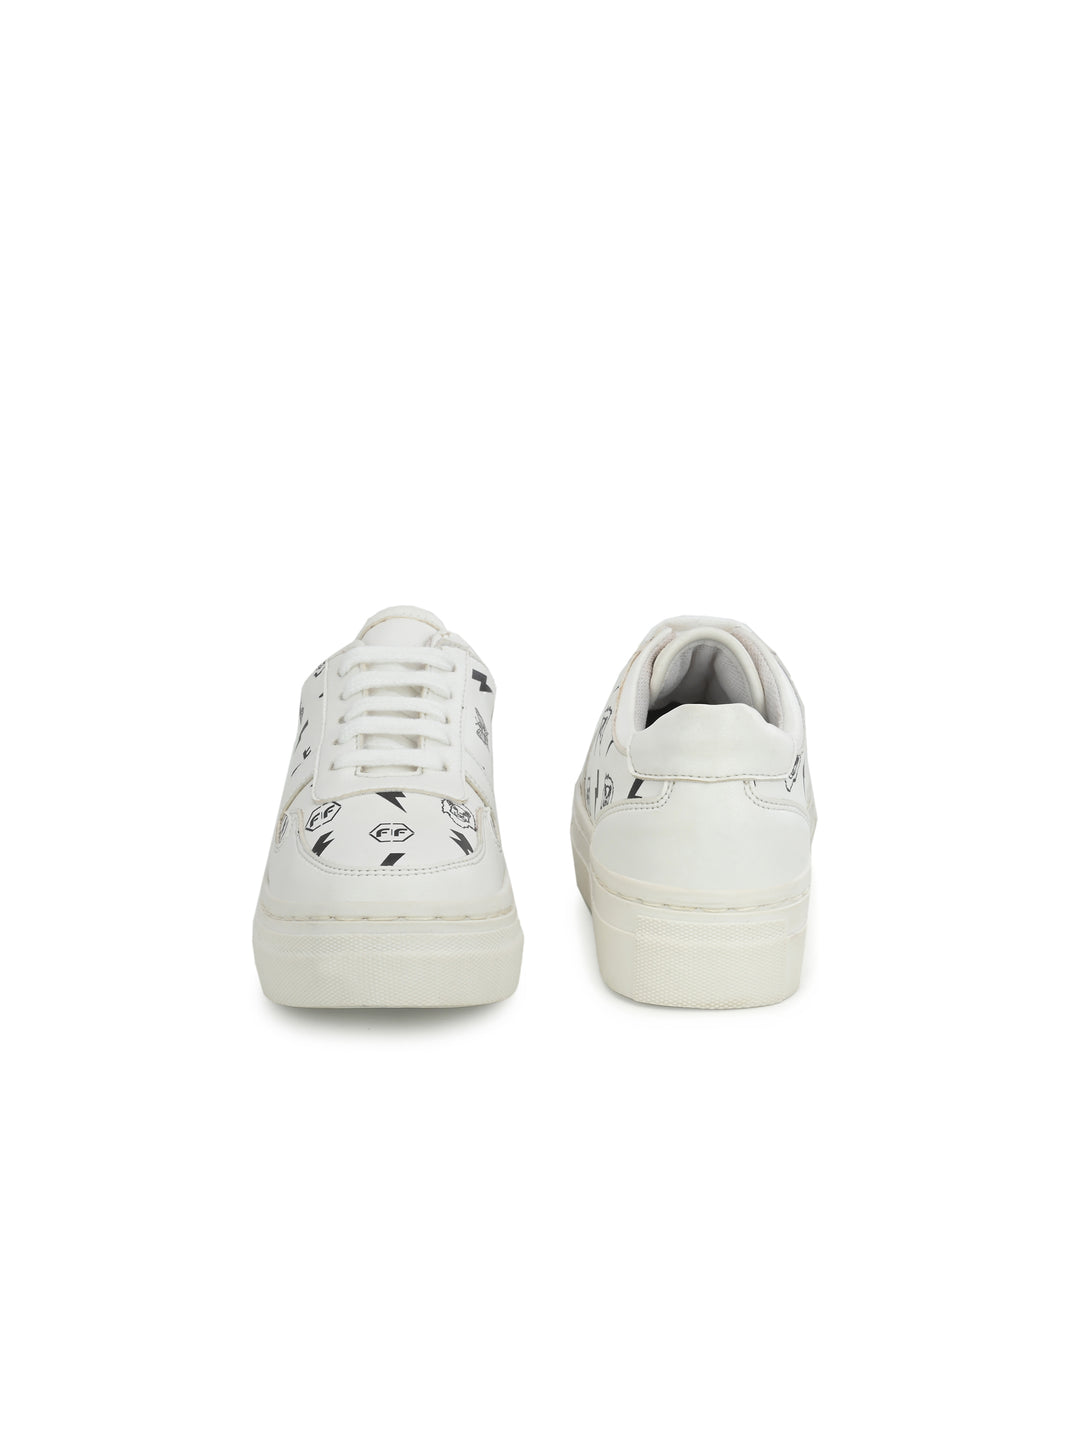 Rockstar White Dual Size technology Shoes for Kids